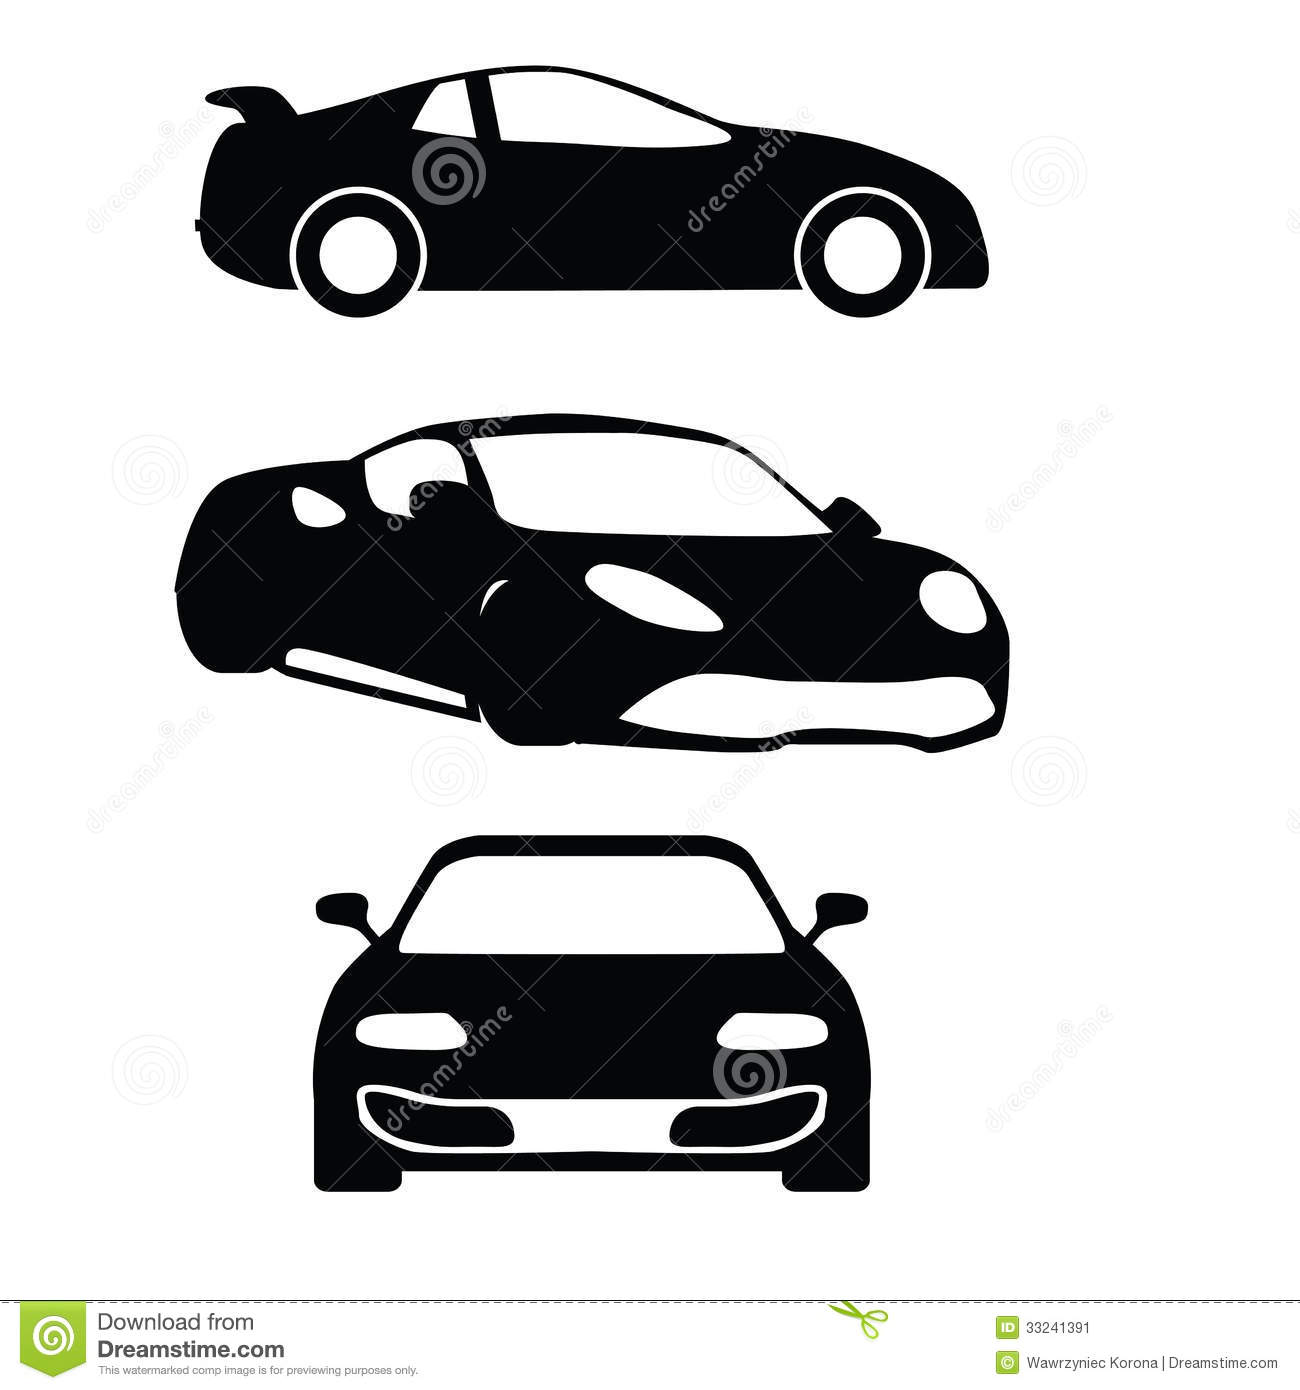 Front Car Silhouette Vector